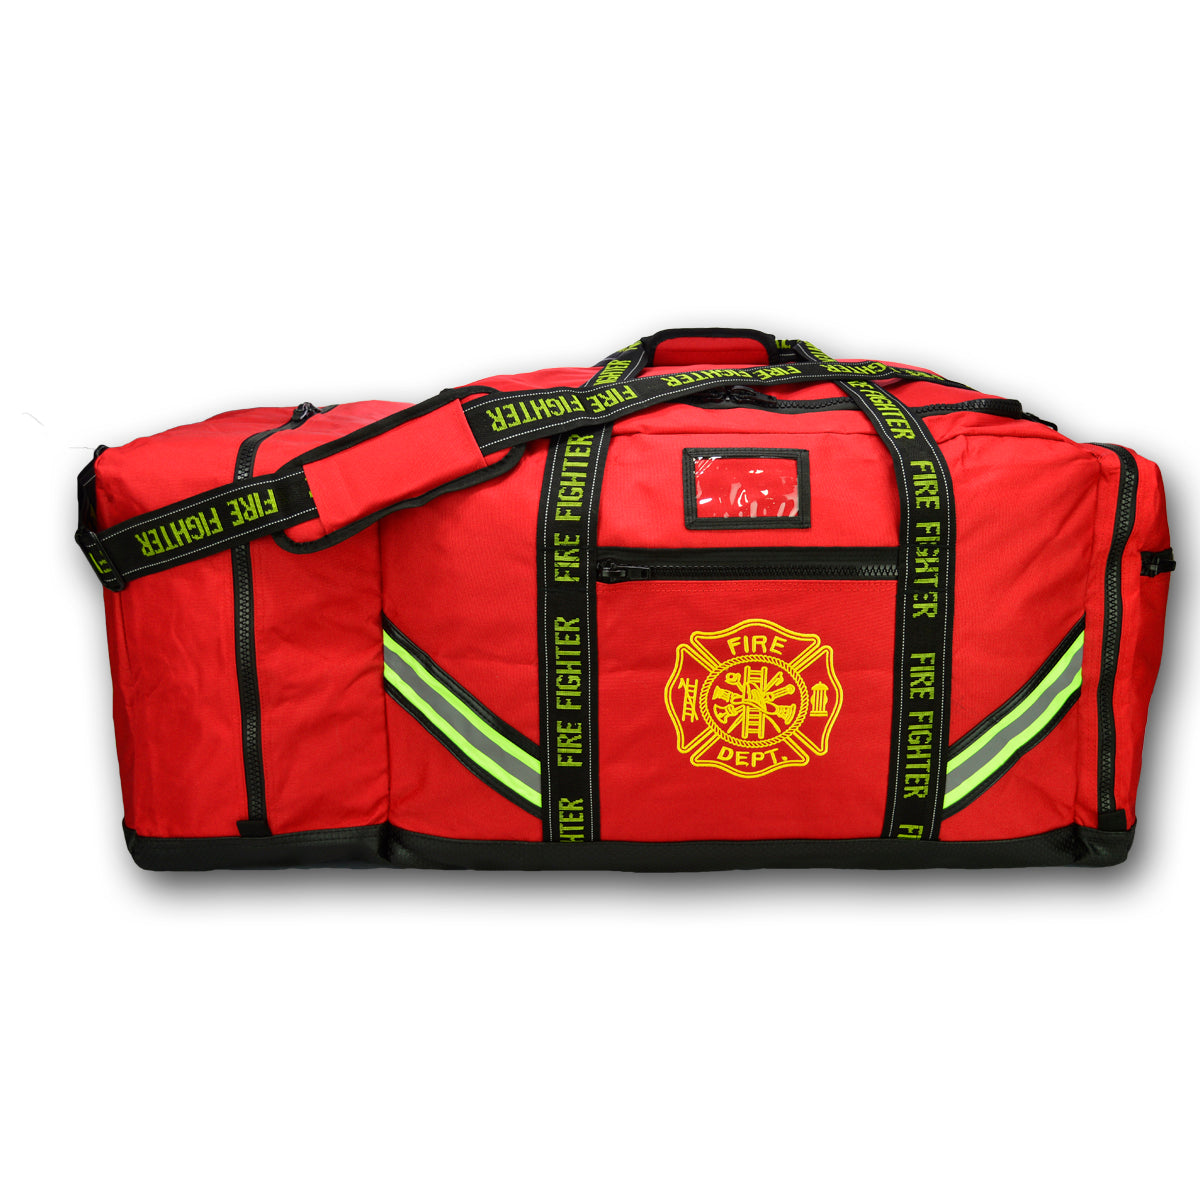 Lightning X Premium 3XL Turnout Gear Bag (LXFB10) | Fire Store | Fuego Fire Center | Firefighter Gear | The Nomex and Kevlar in your turnout gear is highly sensitive to the sun. In fact, ultra-violet rays break down the very material that makes the fabric fire resistant in the first place. Keeping your gear clean and storing it in a turnout bag are the two most important factors for extending the life of your department's investment.